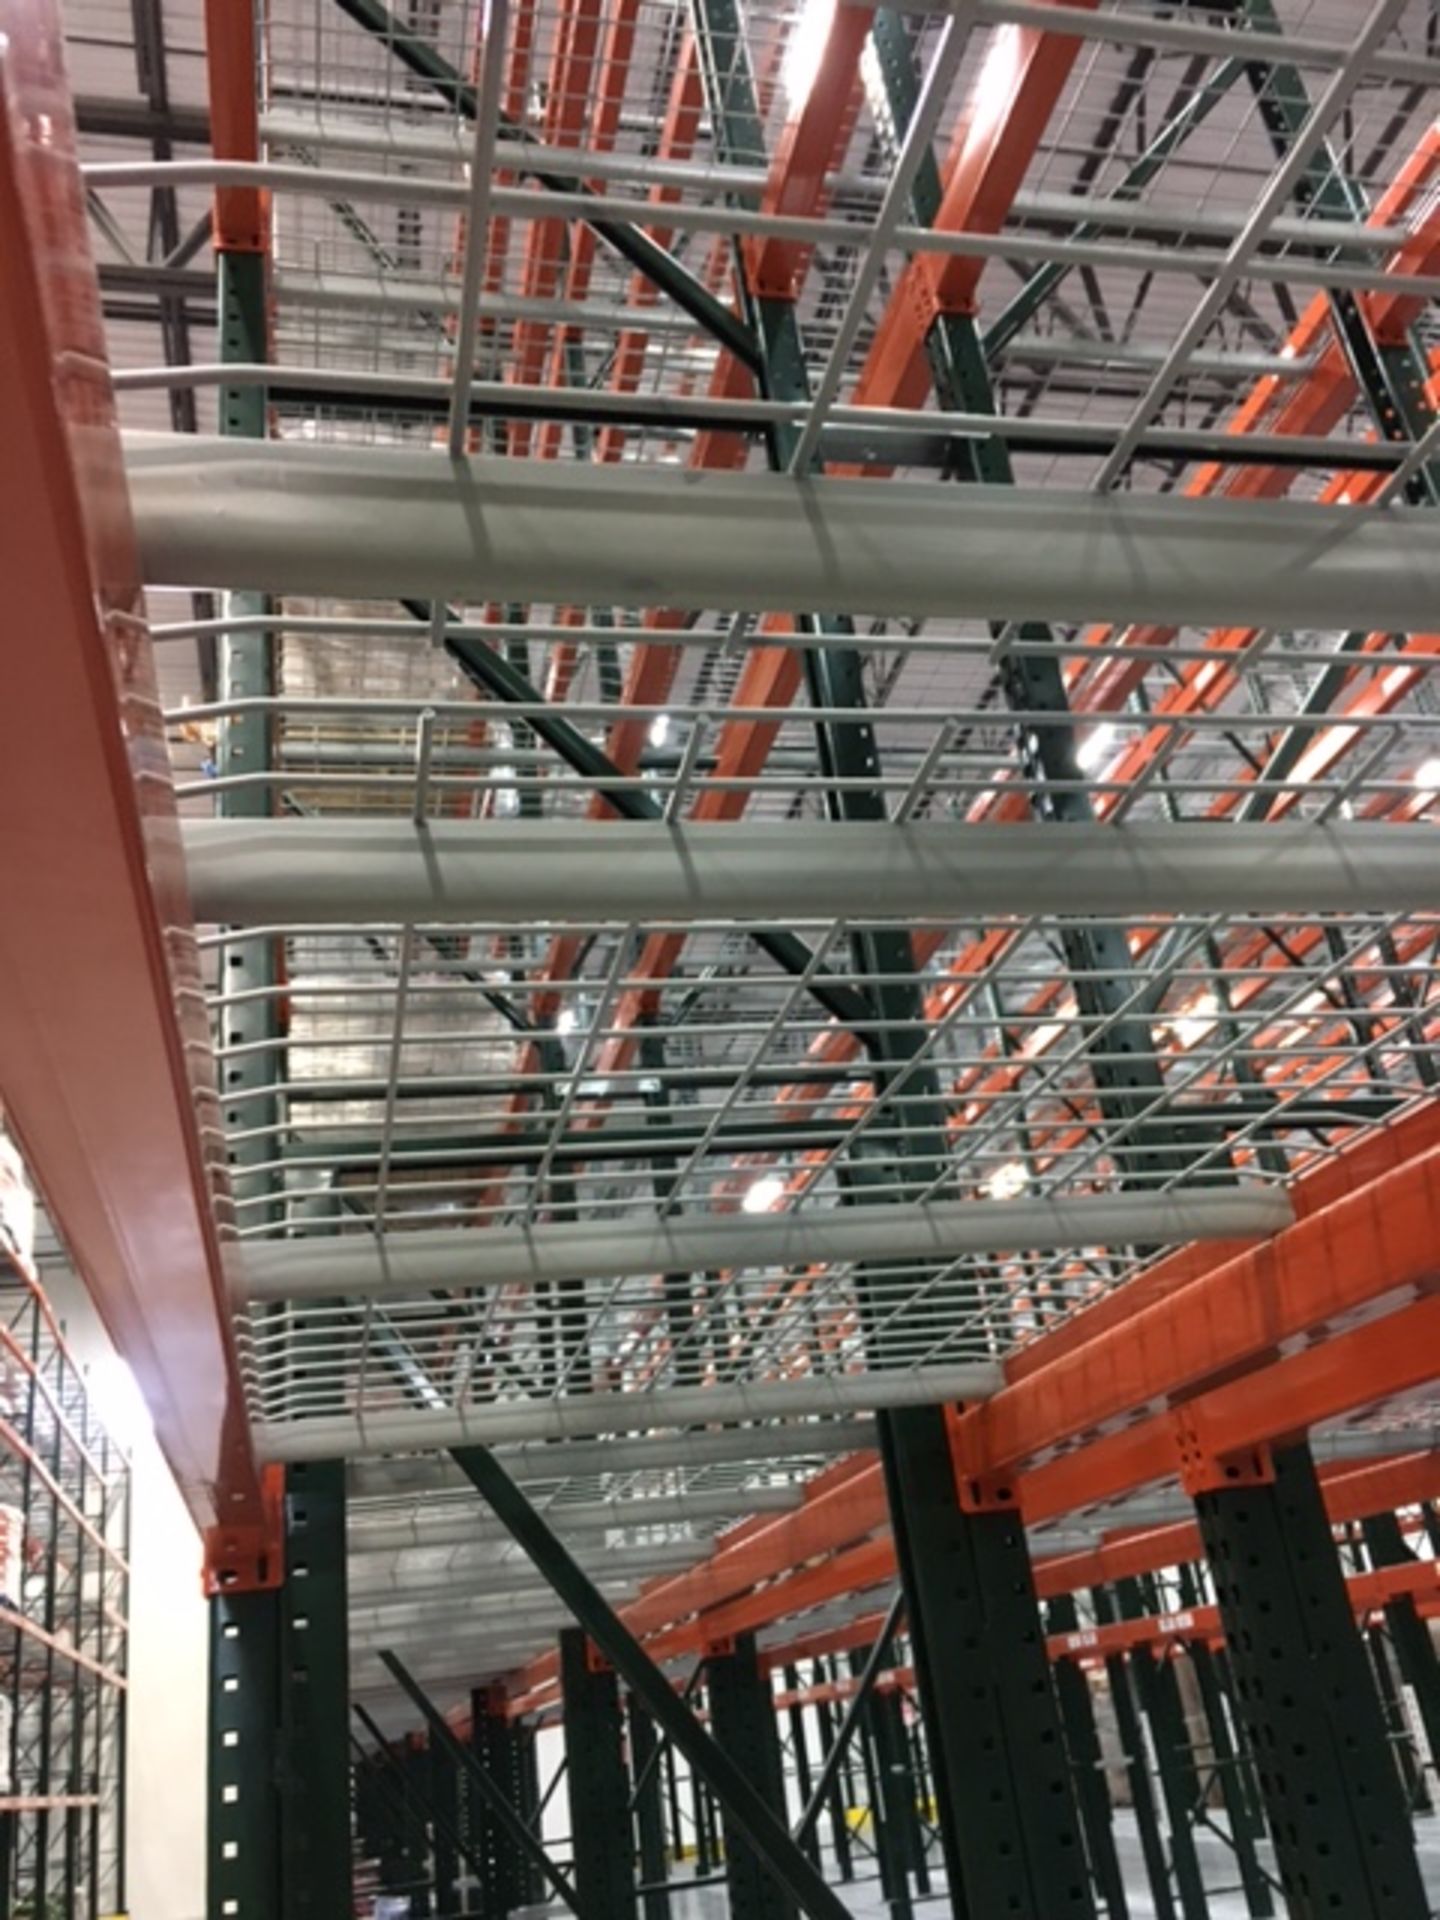 WIRE MESH DECKS FOR PALLET RACKING: 36'' X 54'' INSIDE WATERFALL (X400) - Image 2 of 3